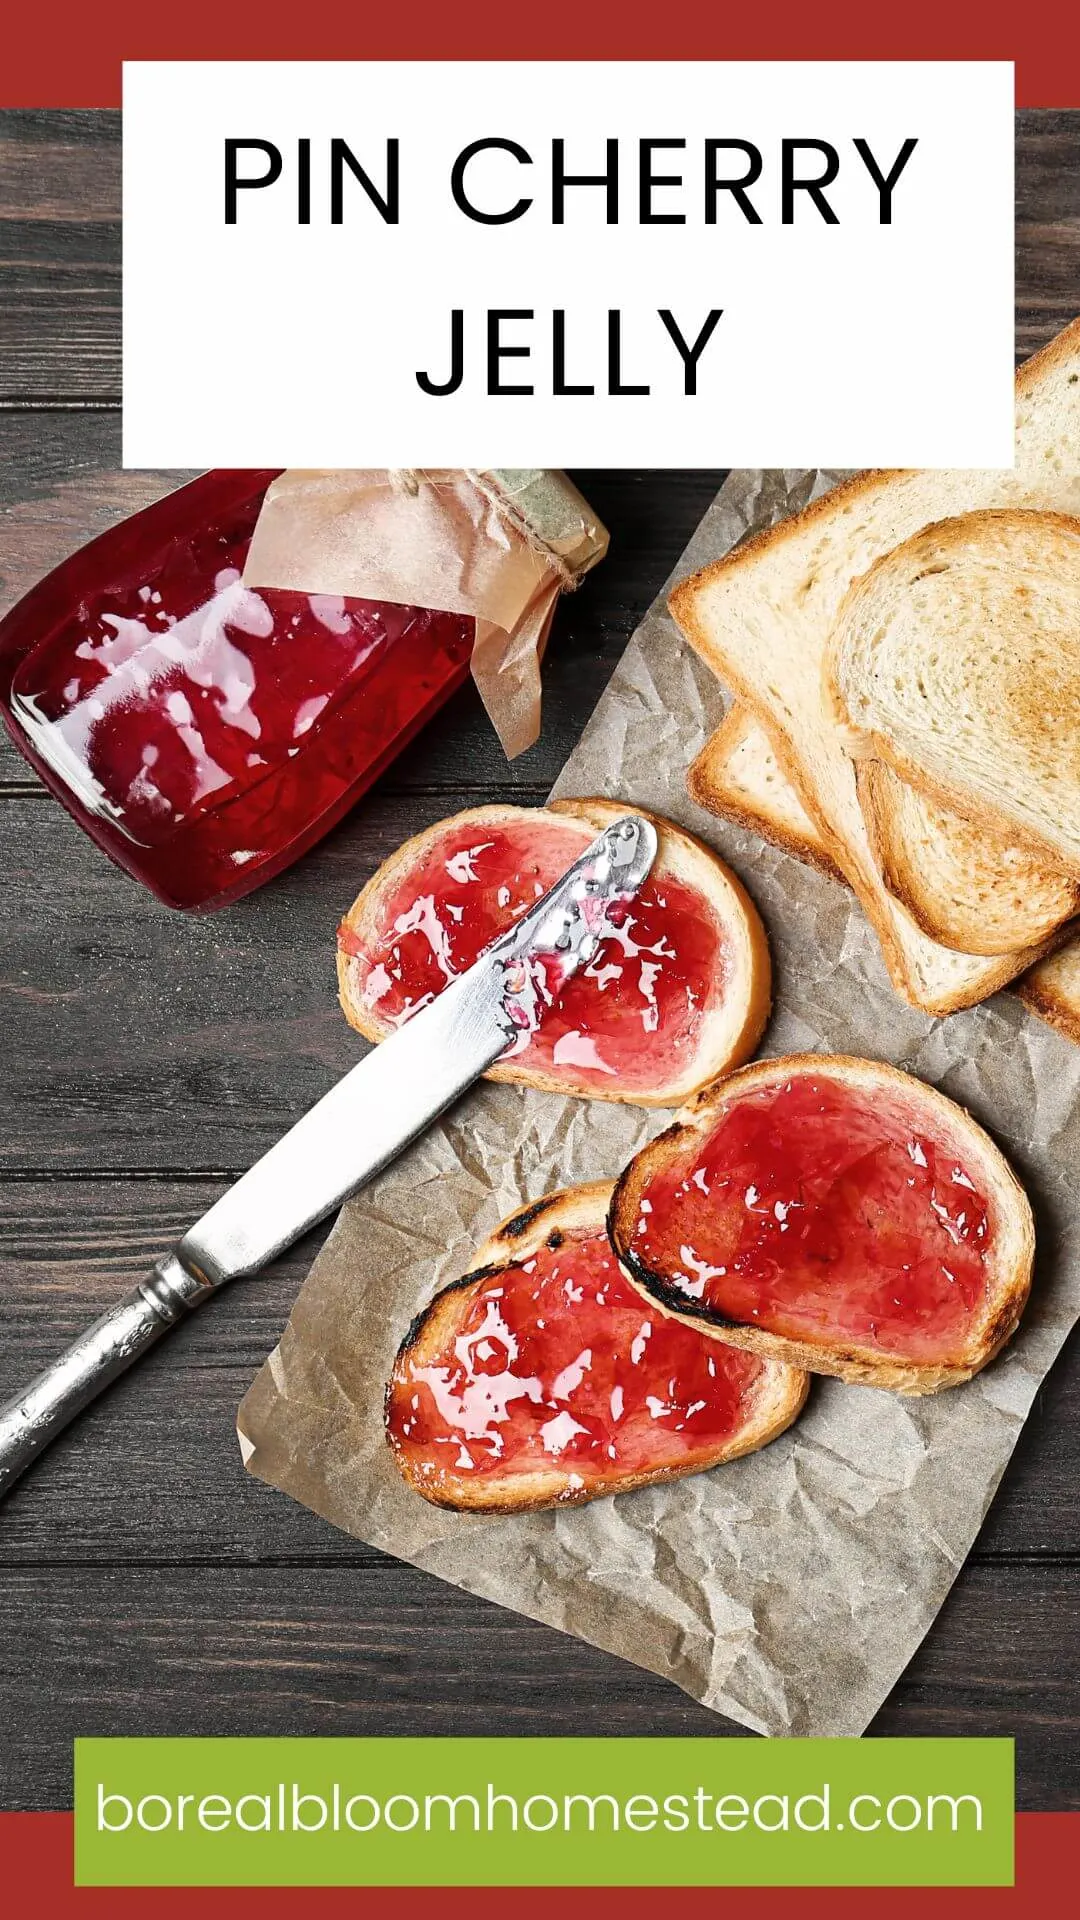 Pin cherry jelly spread on toast with text overlay : pin cherry jelly. 